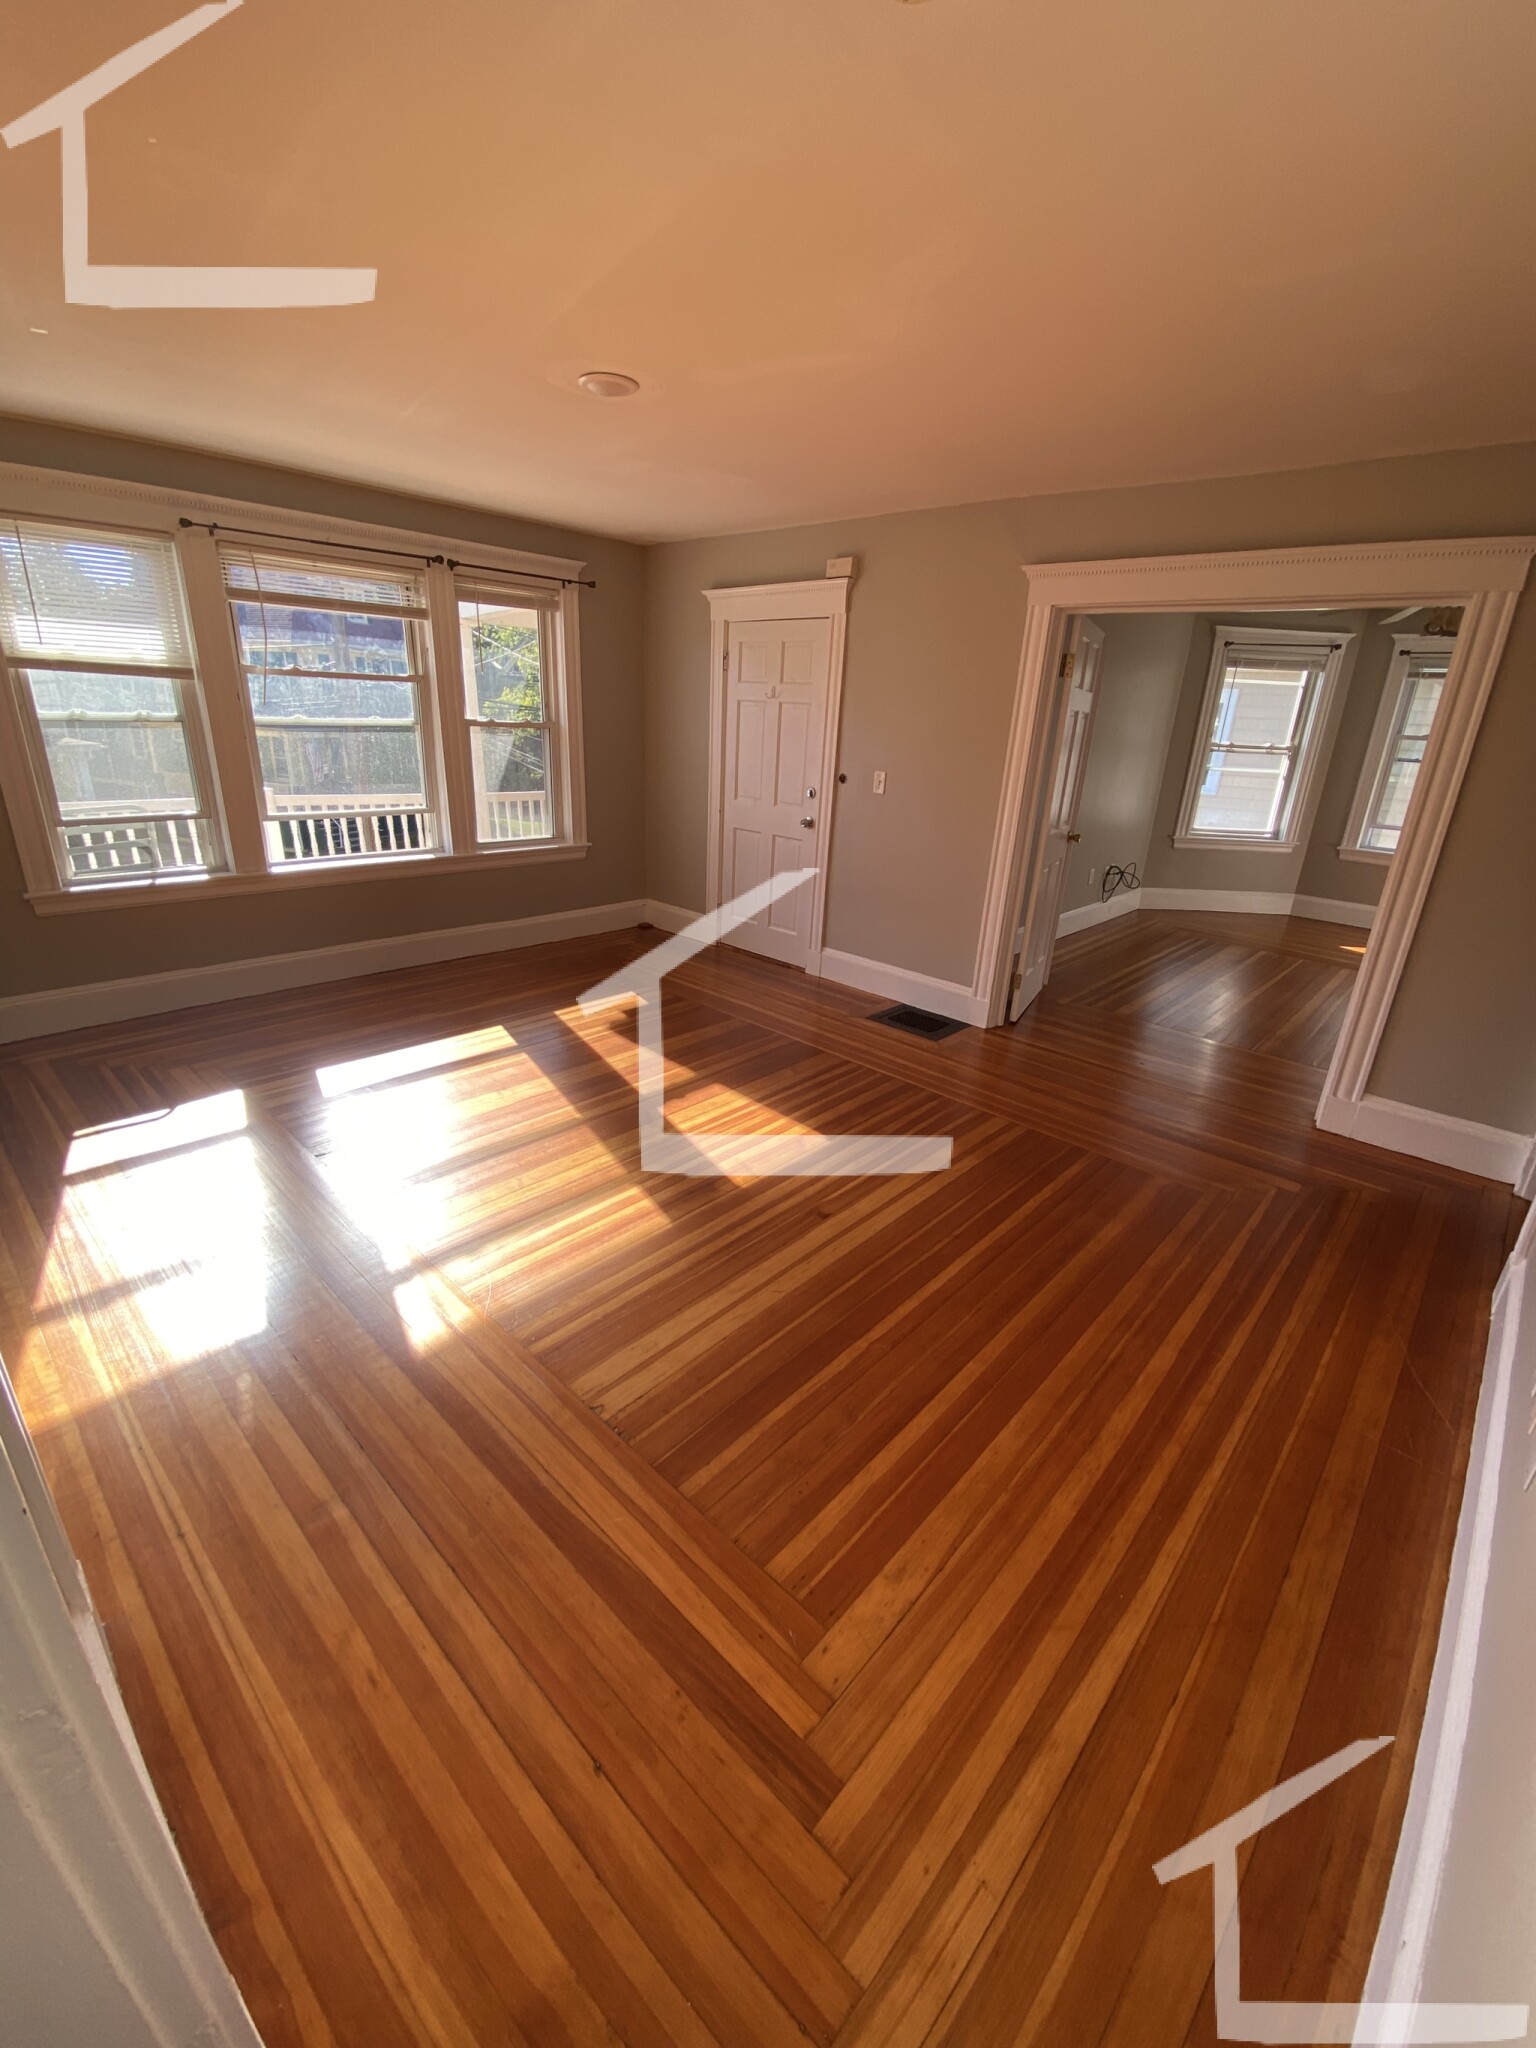 Photos of apartment on Elm St.,Quincy MA 02169